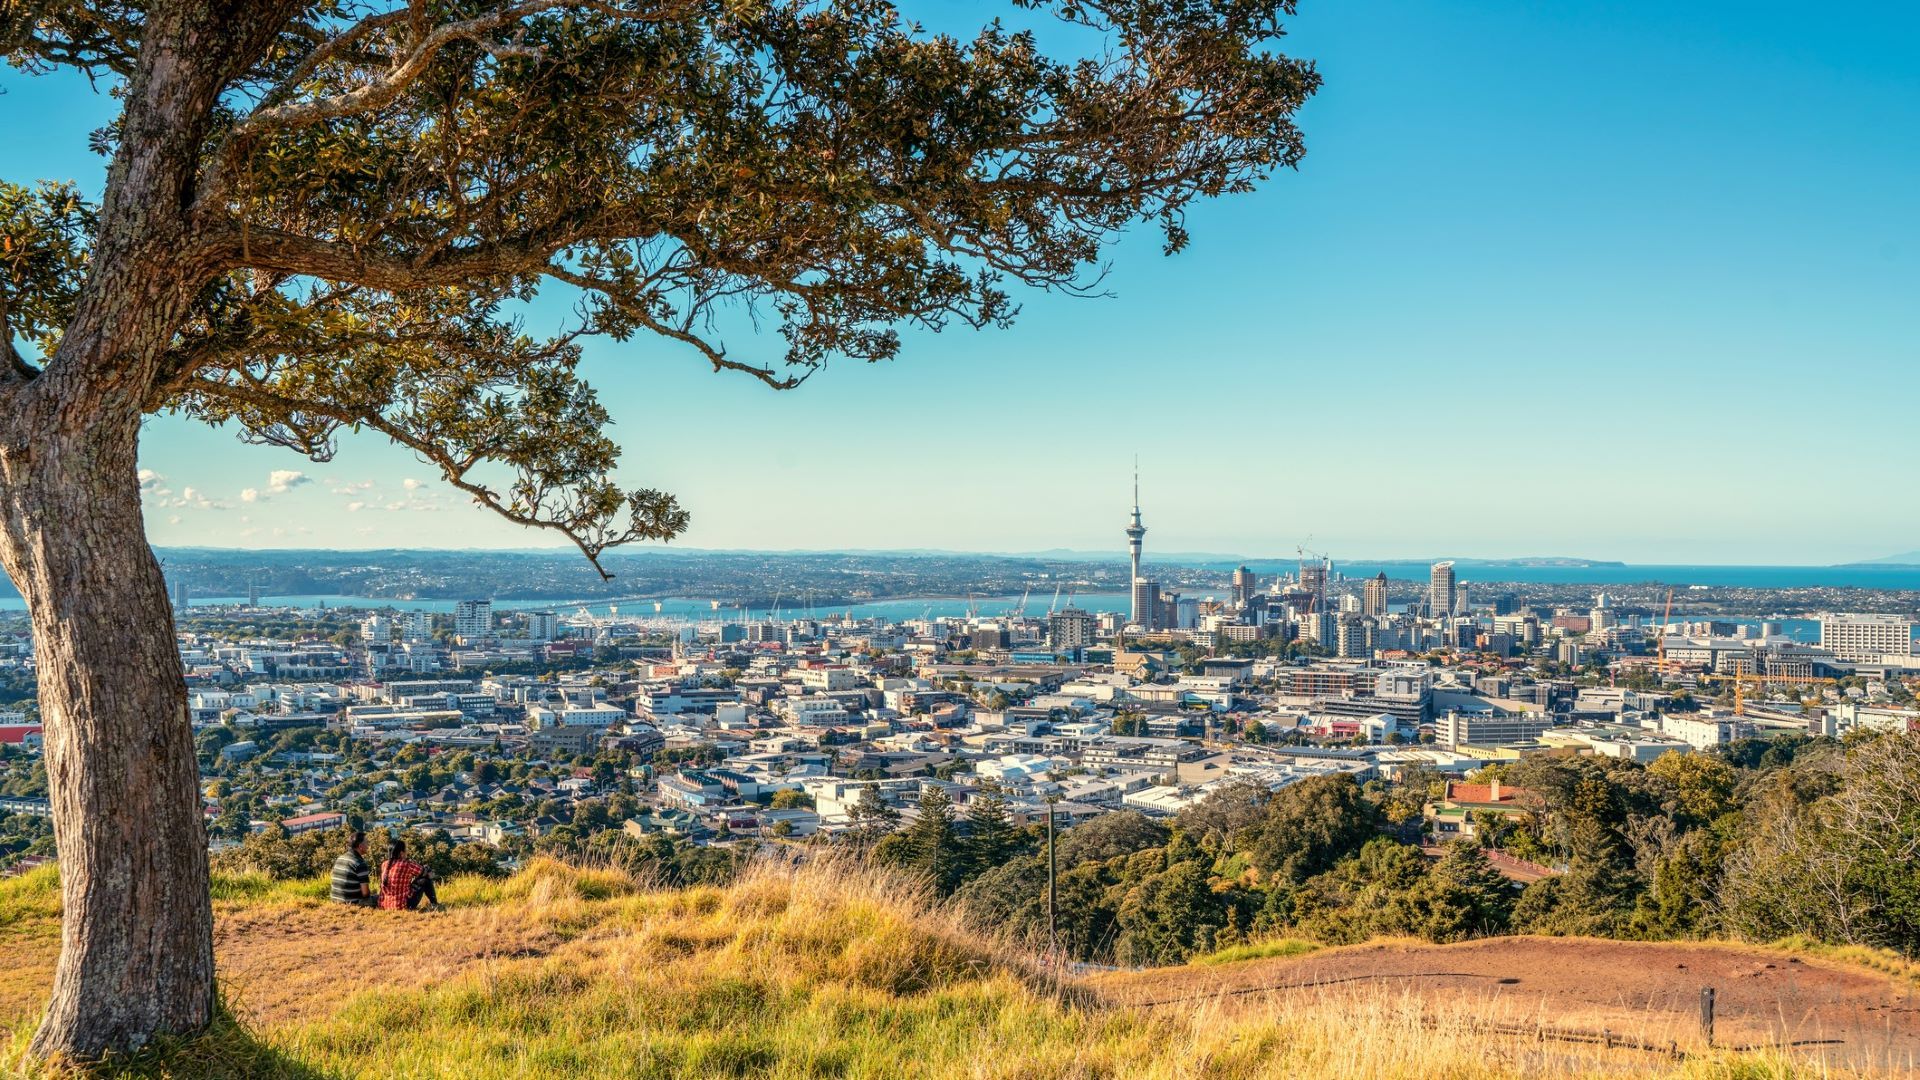 <p>                     Auckland in New Zealand is a great place to visit with your pet, with plenty of pet friendly beaches, accommodation and plenty to do. Mellons Bay, Takapuna beach, and Piha beach are the most popular dog beaches, but if your pet is less sociable, you can find quieter places to go too.                    </p>